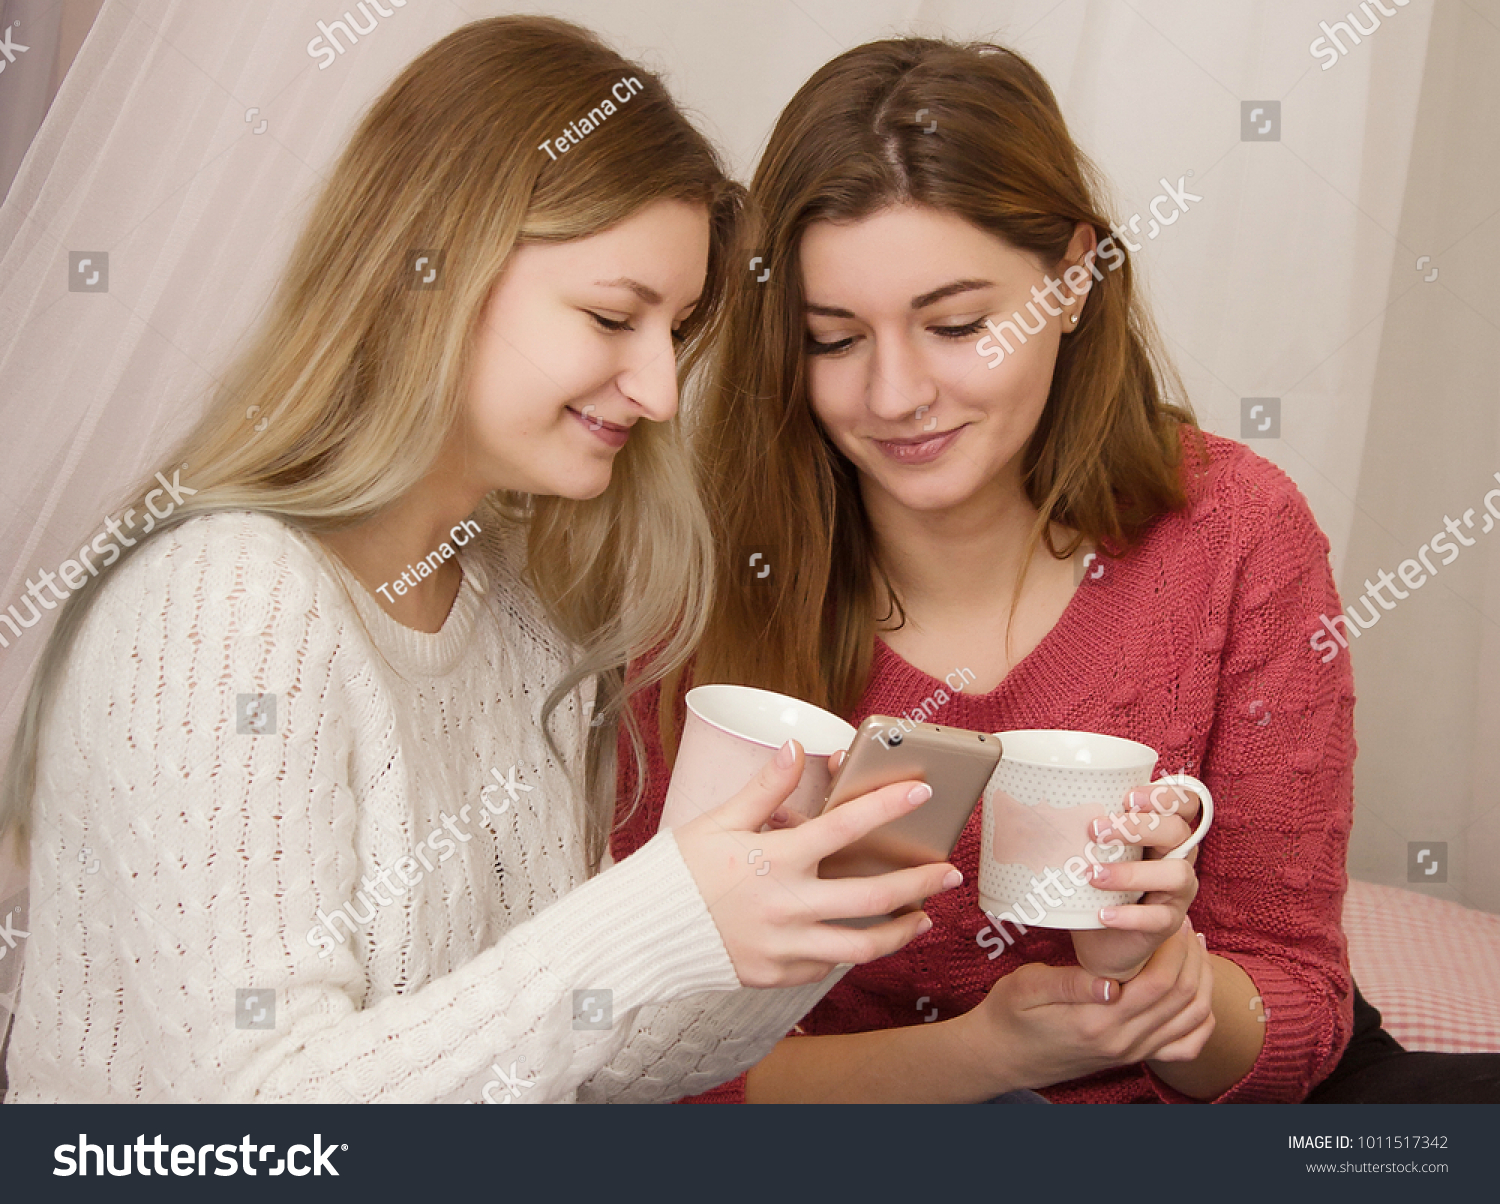 Girls looking to chat